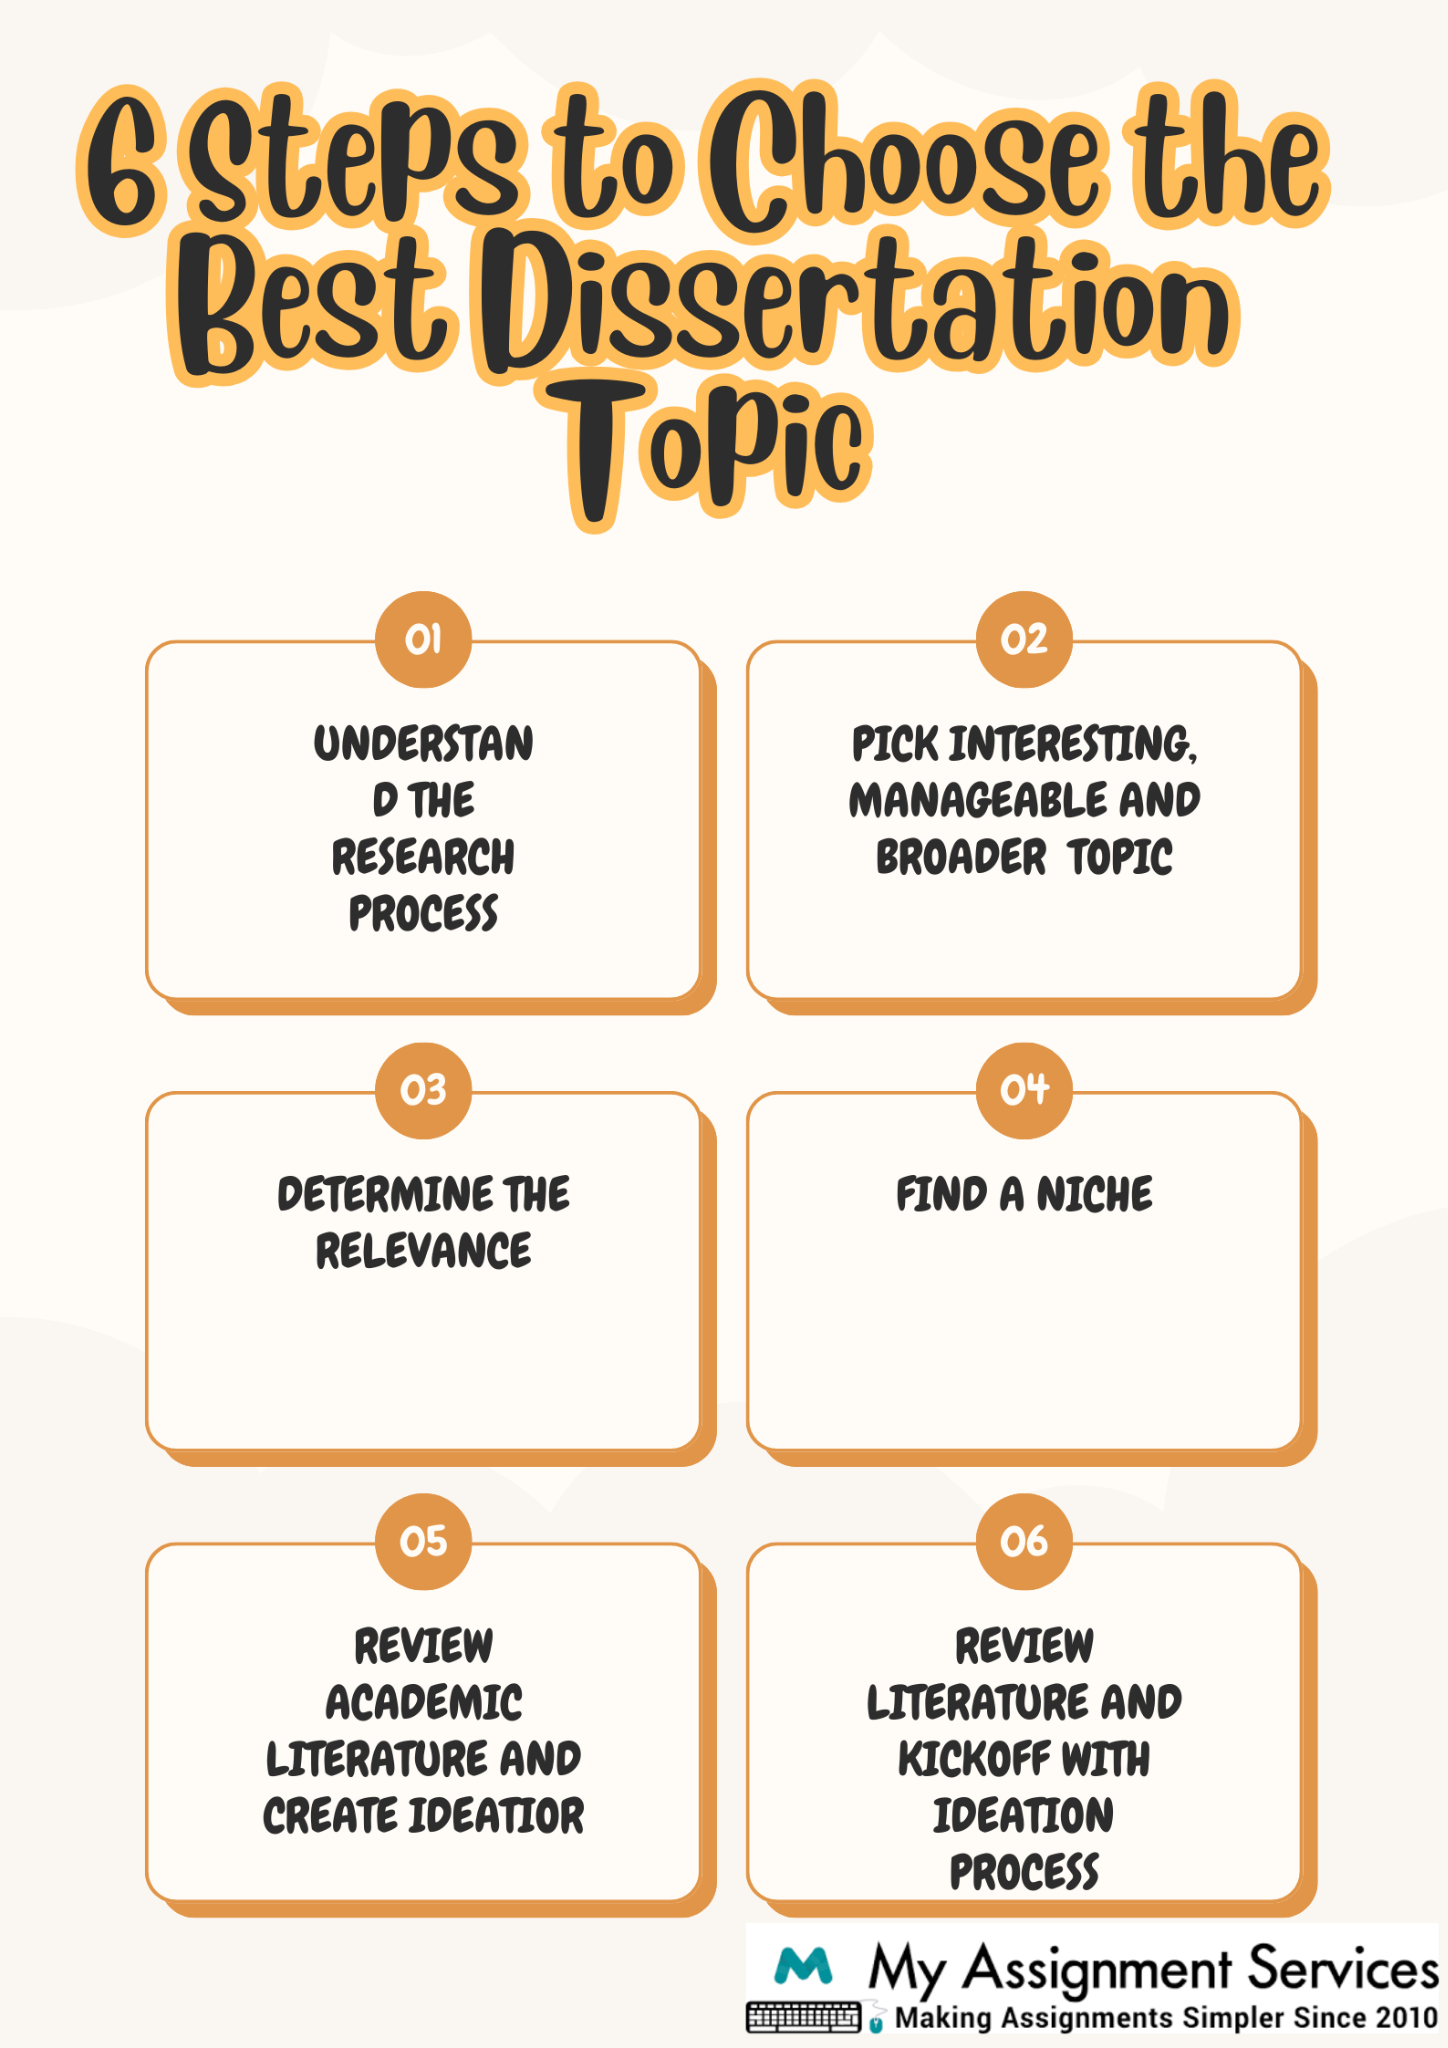 6 Steps to Choose The Best Dissertation Topic